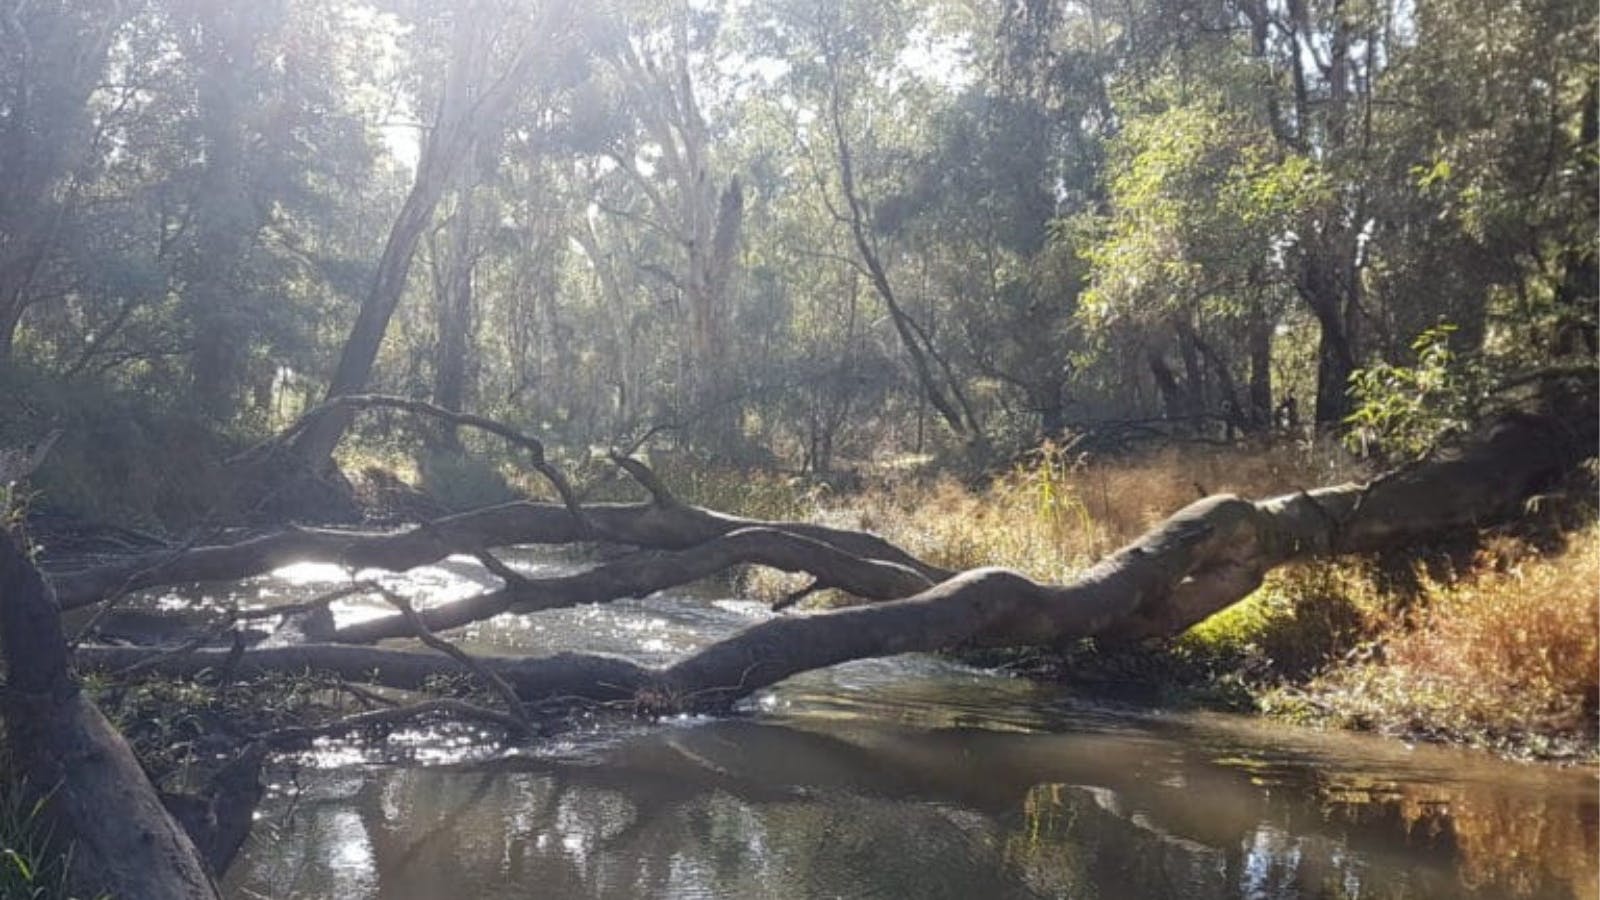 Tree down lying over the river, trees, native vegetation, sun filtering through trees.